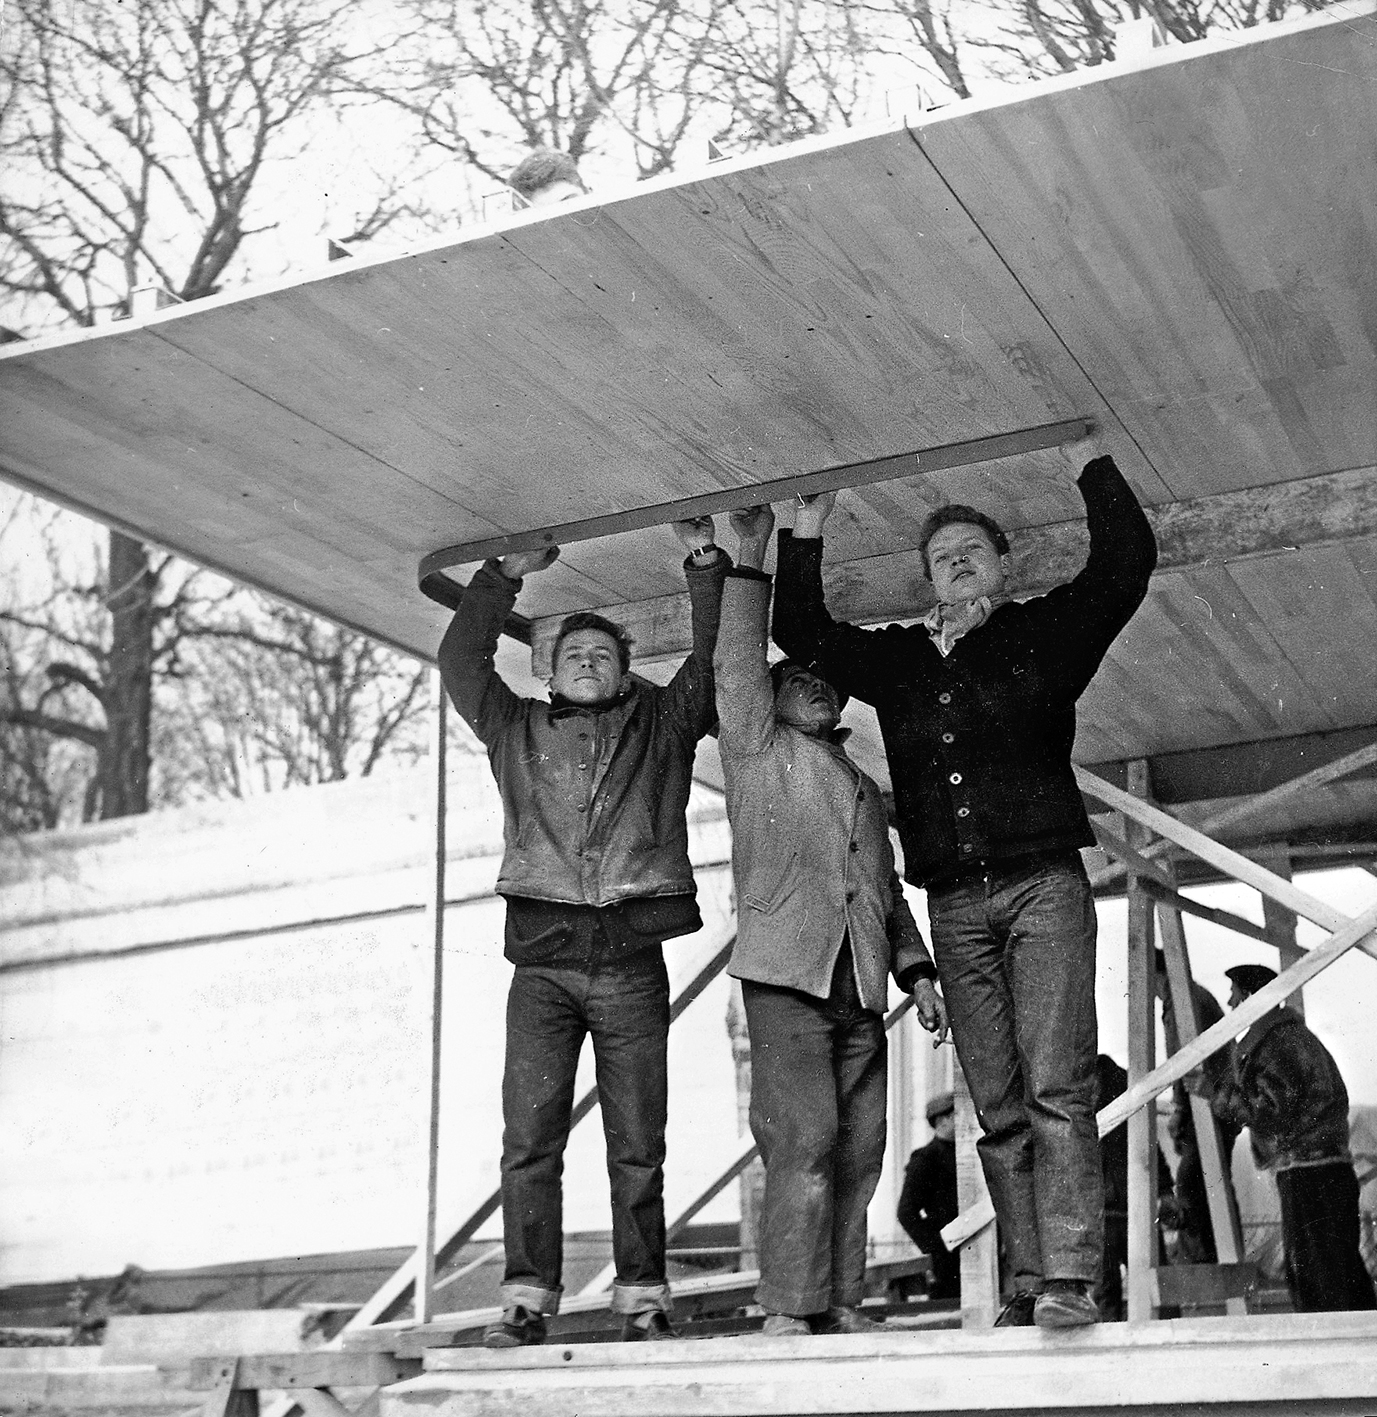 Les Jours Meilleurs demountable house. Installing the wooden panels for the roof and ceiling, Quai Alexandre-III, Paris, February 1956.